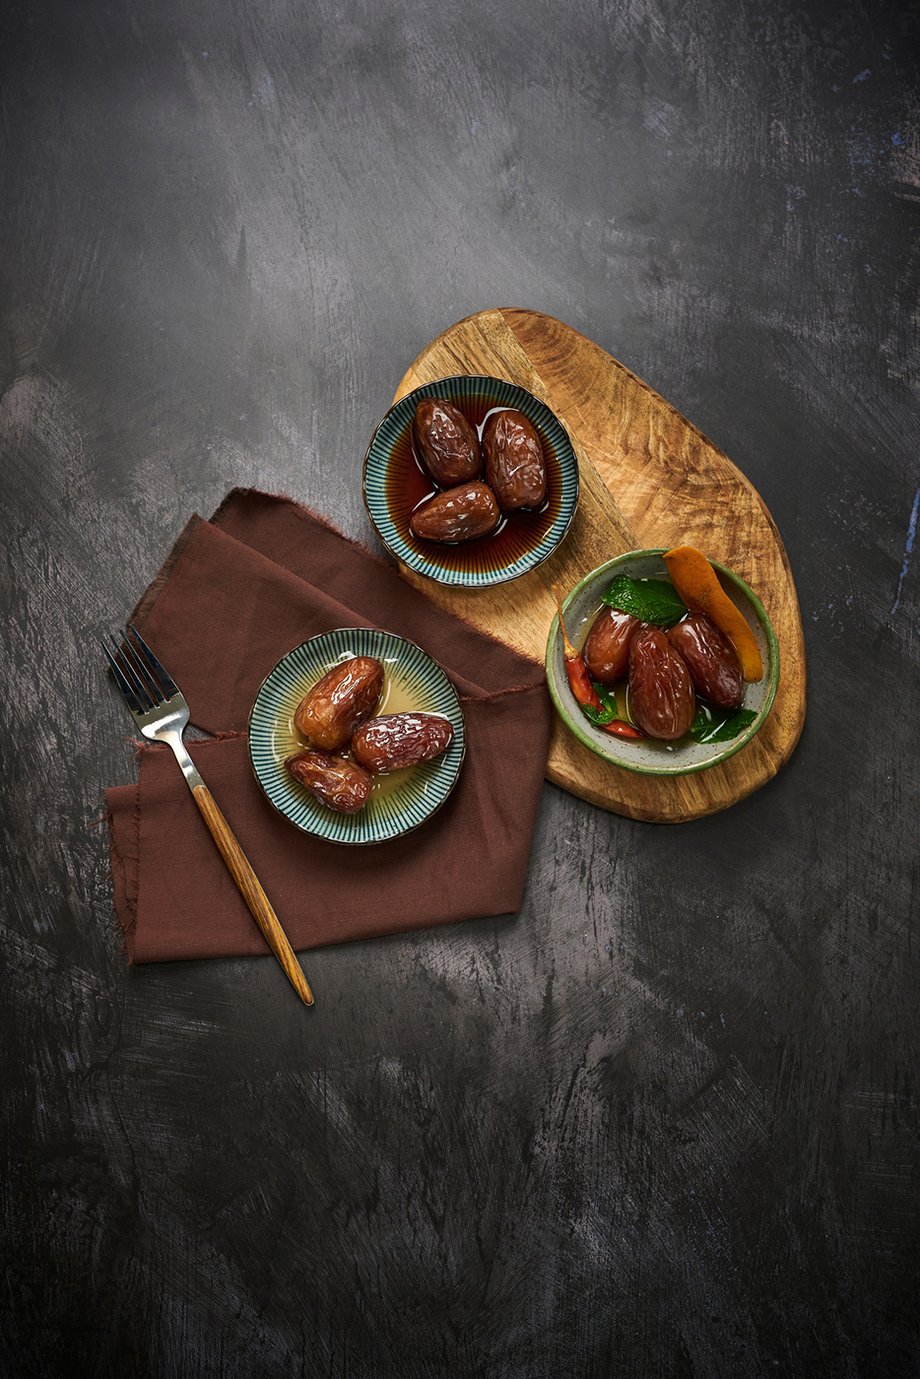 Three ceramic bowls of dates in syrup on top of a  wooden board with black backdrop shot by Rebecca Peloquin for the Los Angeles Times